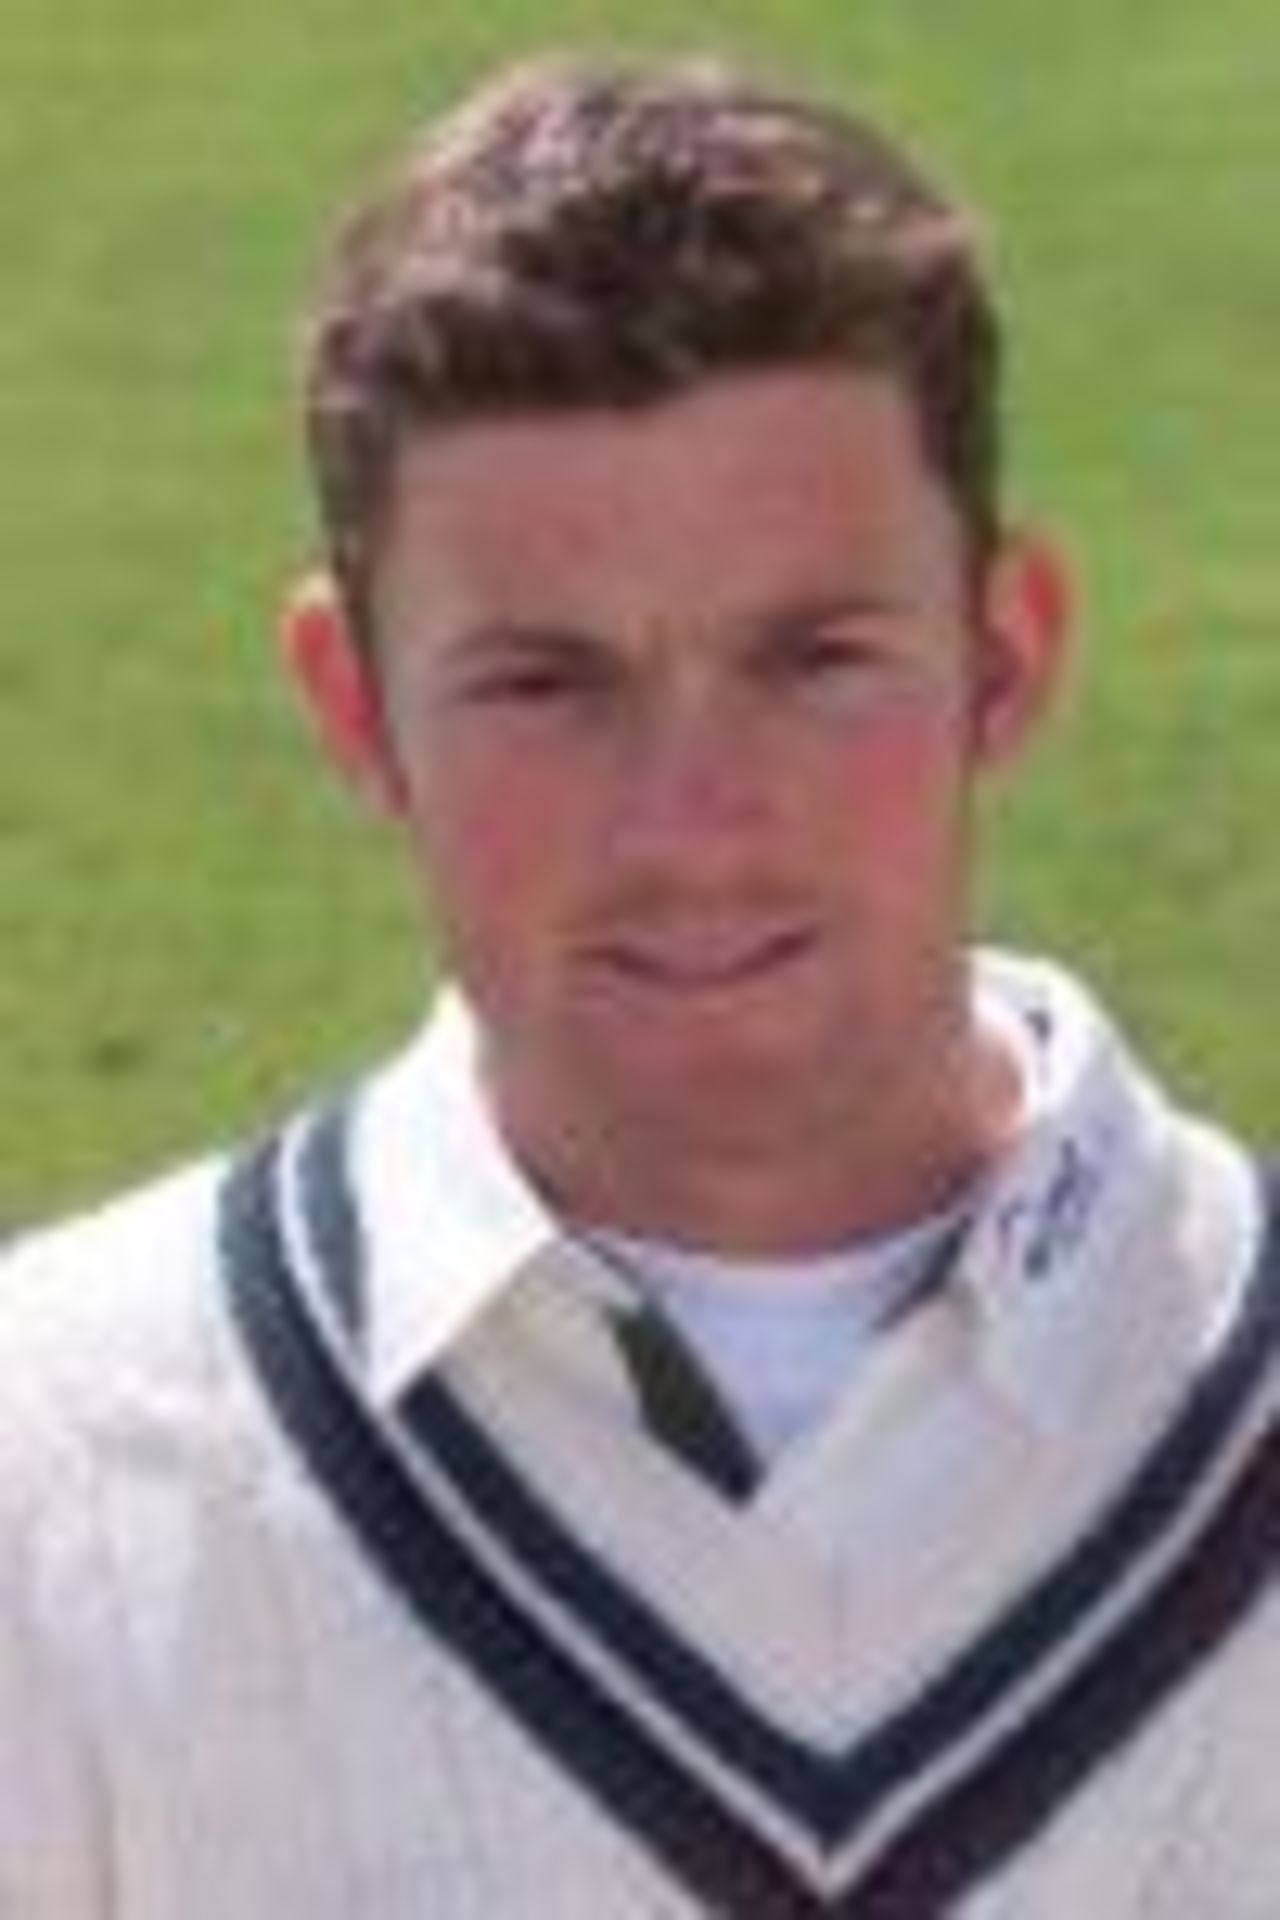 Taken at the Worcs  CCC Photocall, April 2001